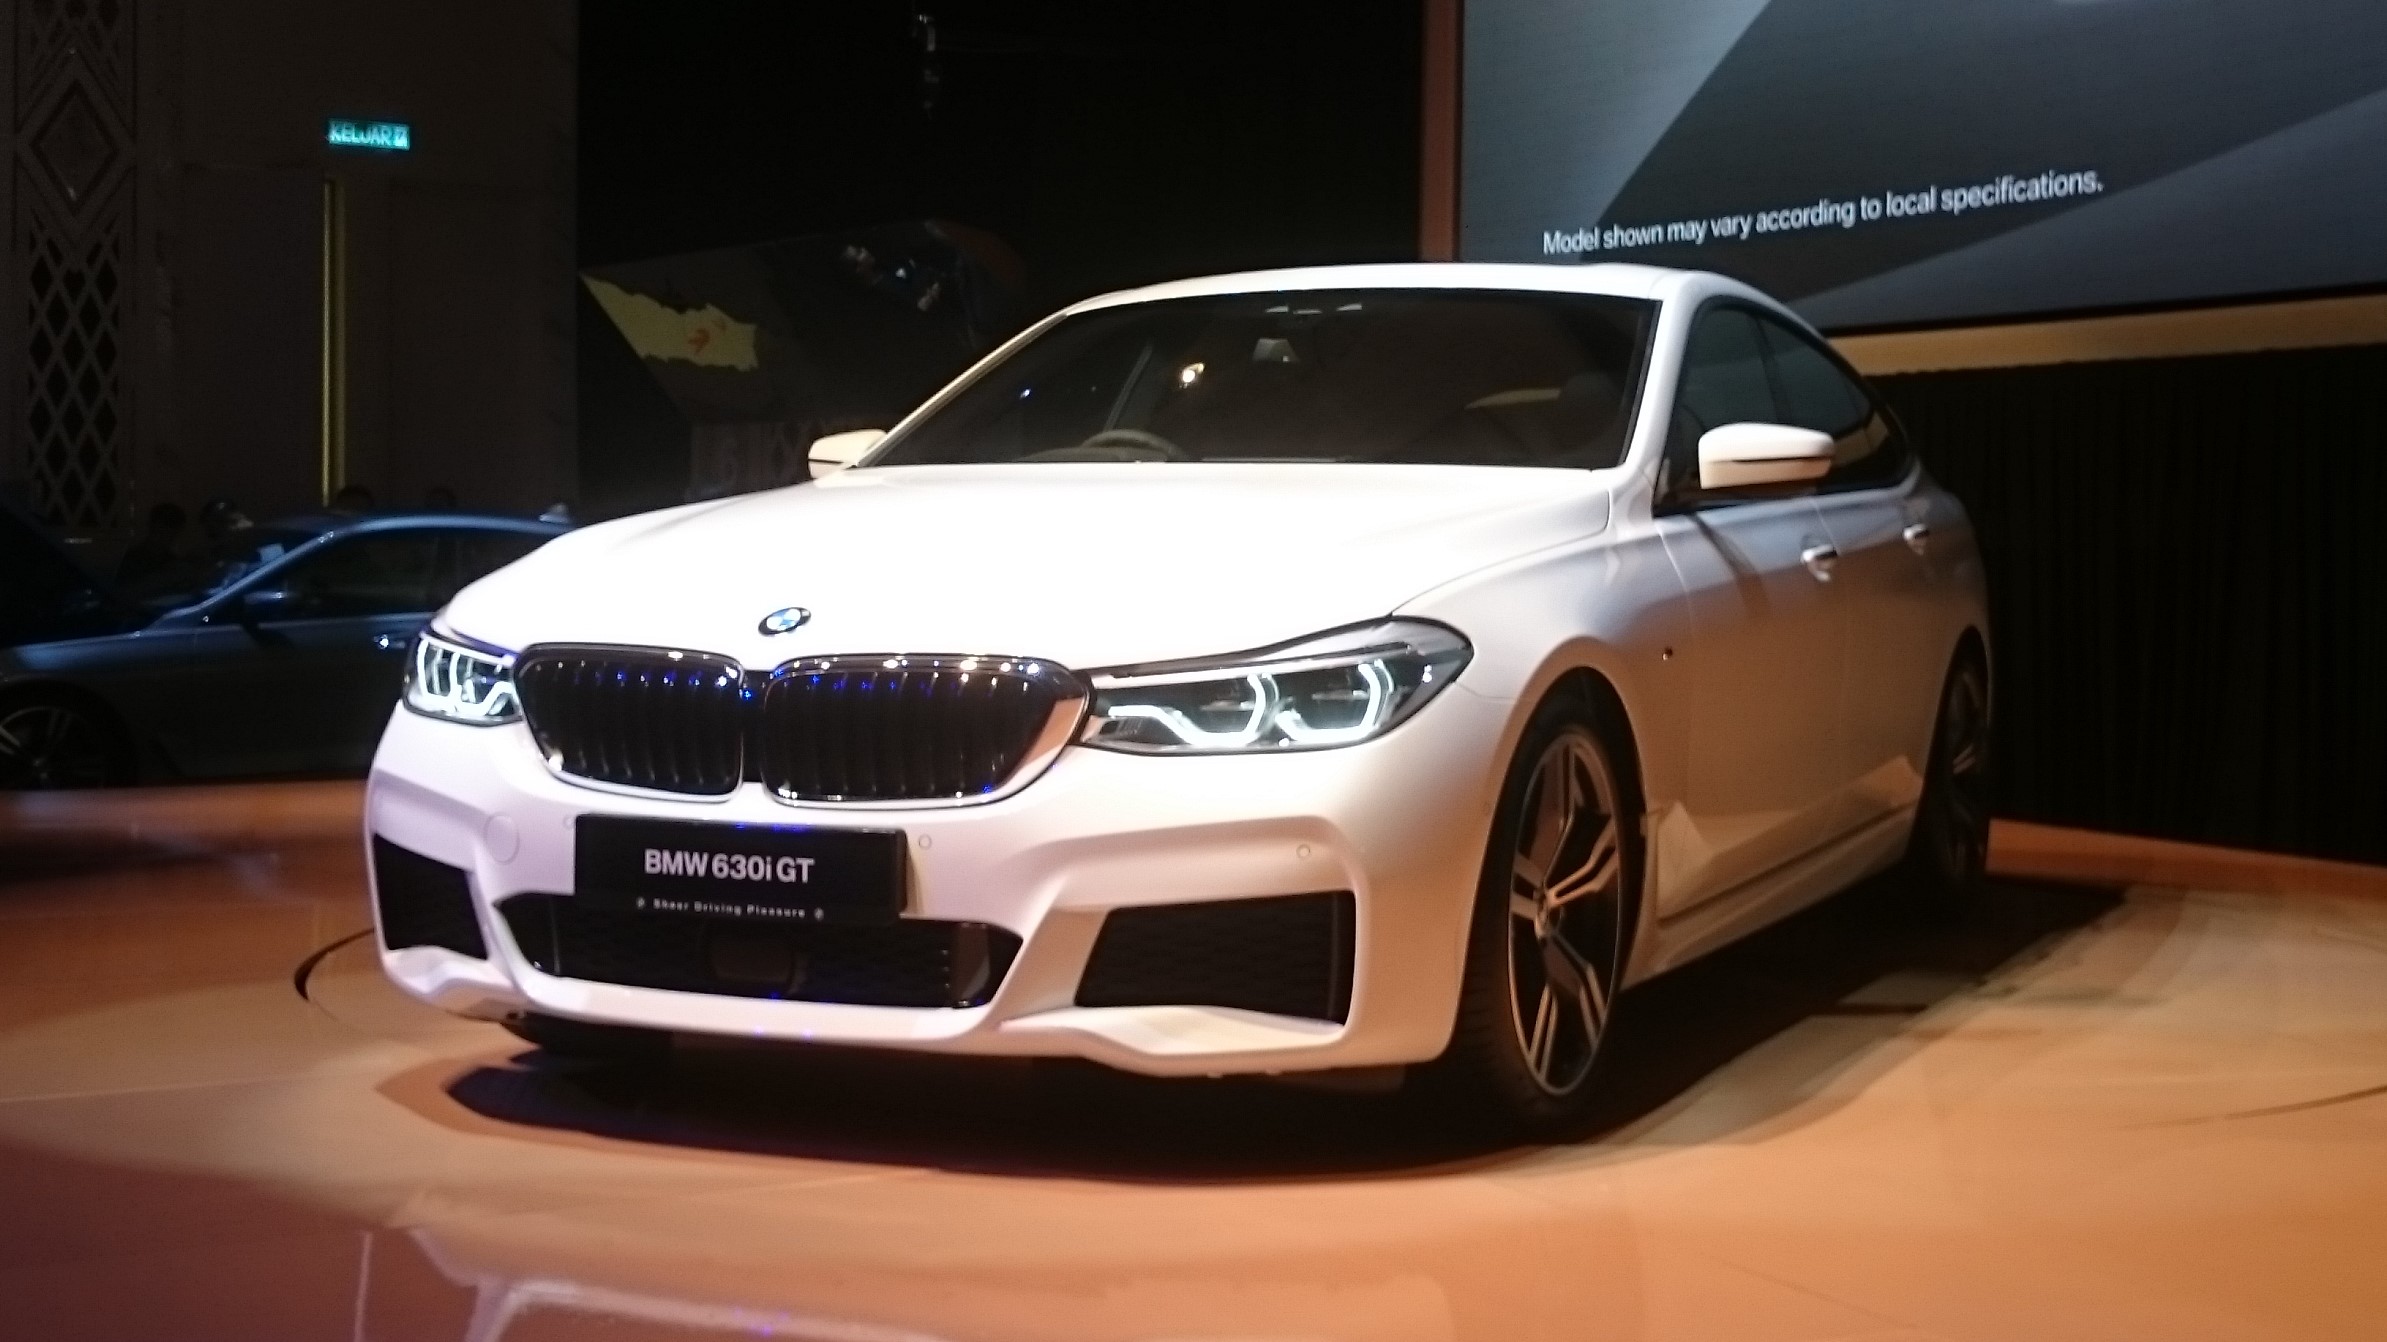 The First-Ever BMW 6 Series GT – click “Watch on Facebook”